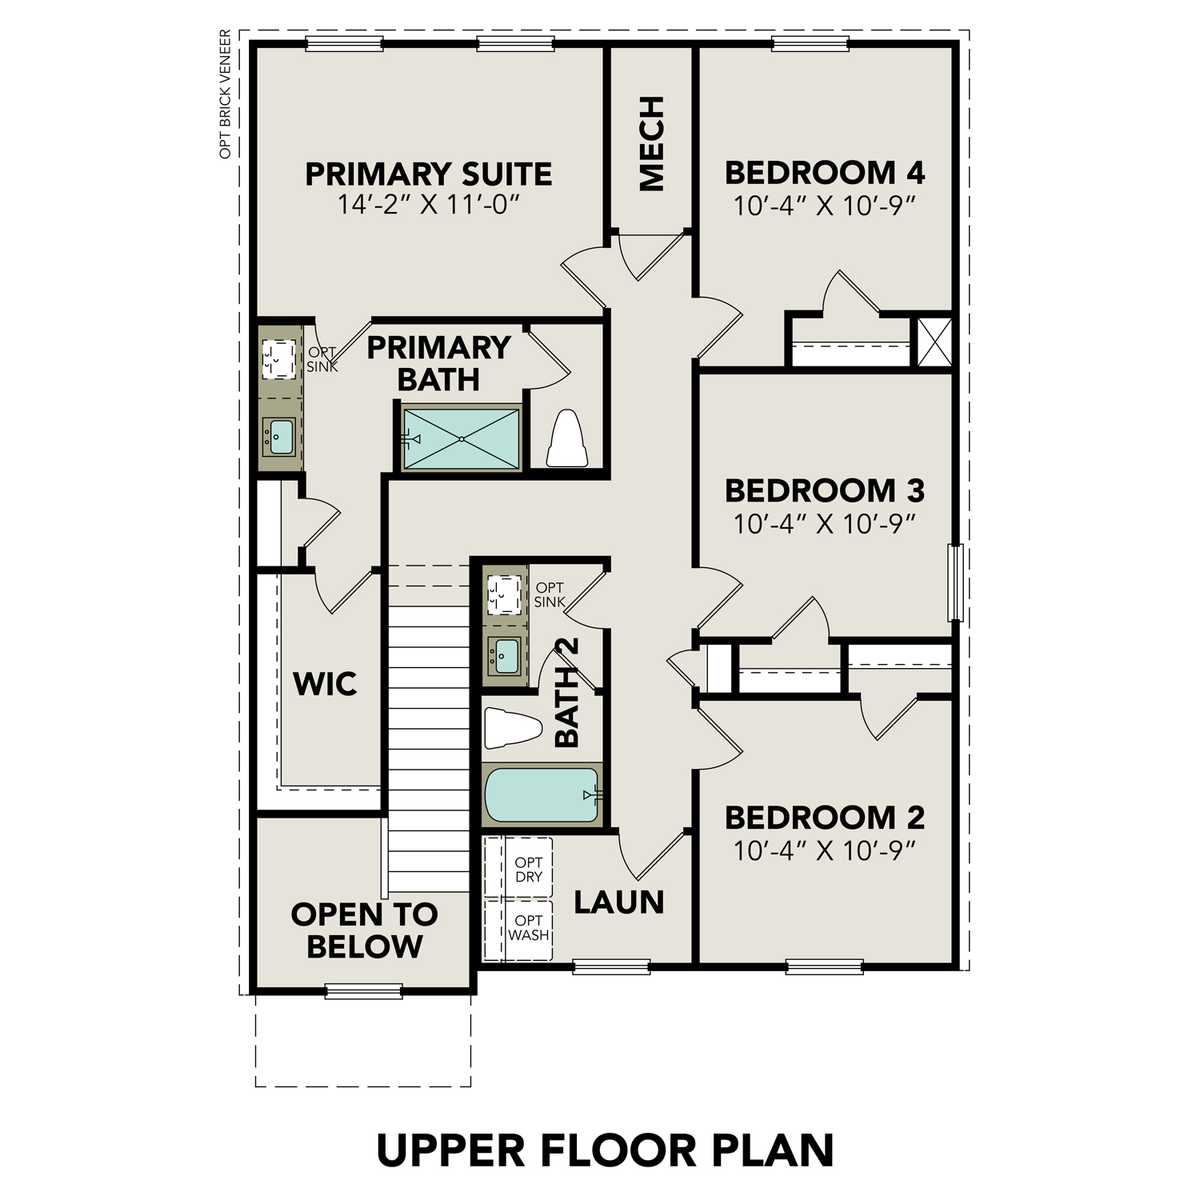 2 - The Trinity F floor plan layout for 8324 Bristlecone Pine Way in Davidson Homes' Lakes at Black Oak community.